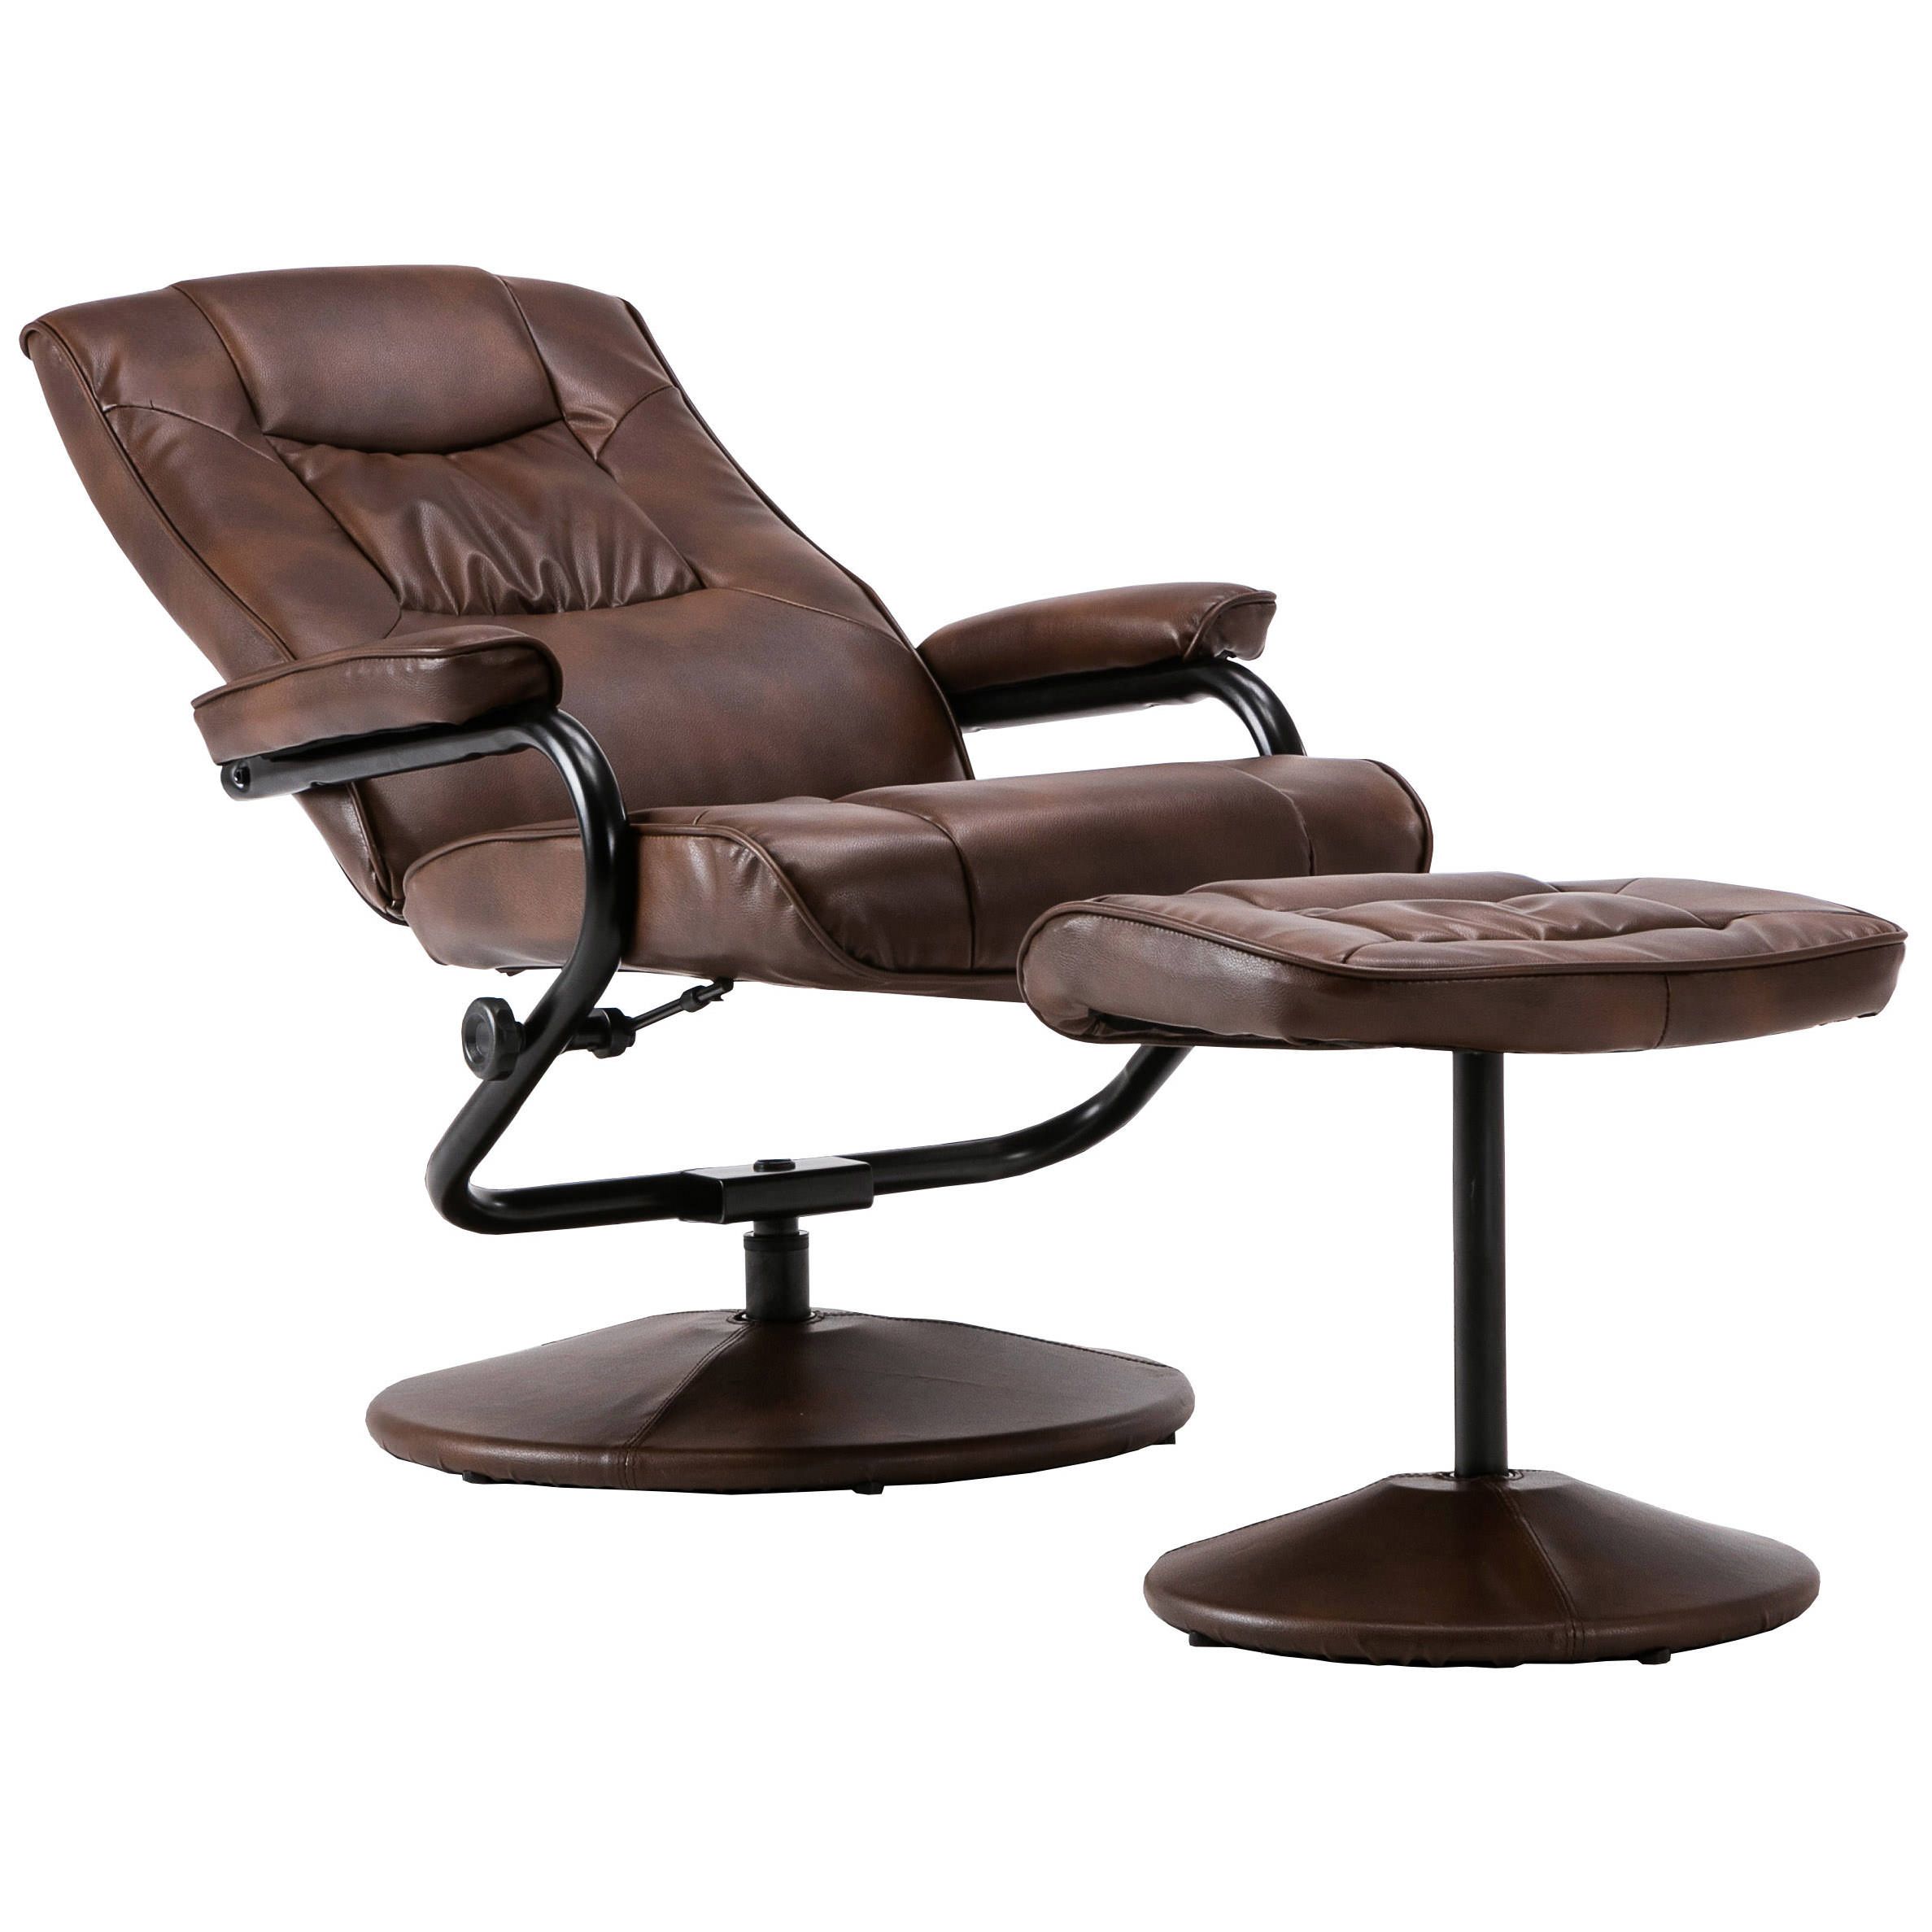 Faux Leather Reclining Recliner Swivel Chair | Black Tan Brown | Ebay Regarding Black Faux Leather Swivel Recliners (View 3 of 20)